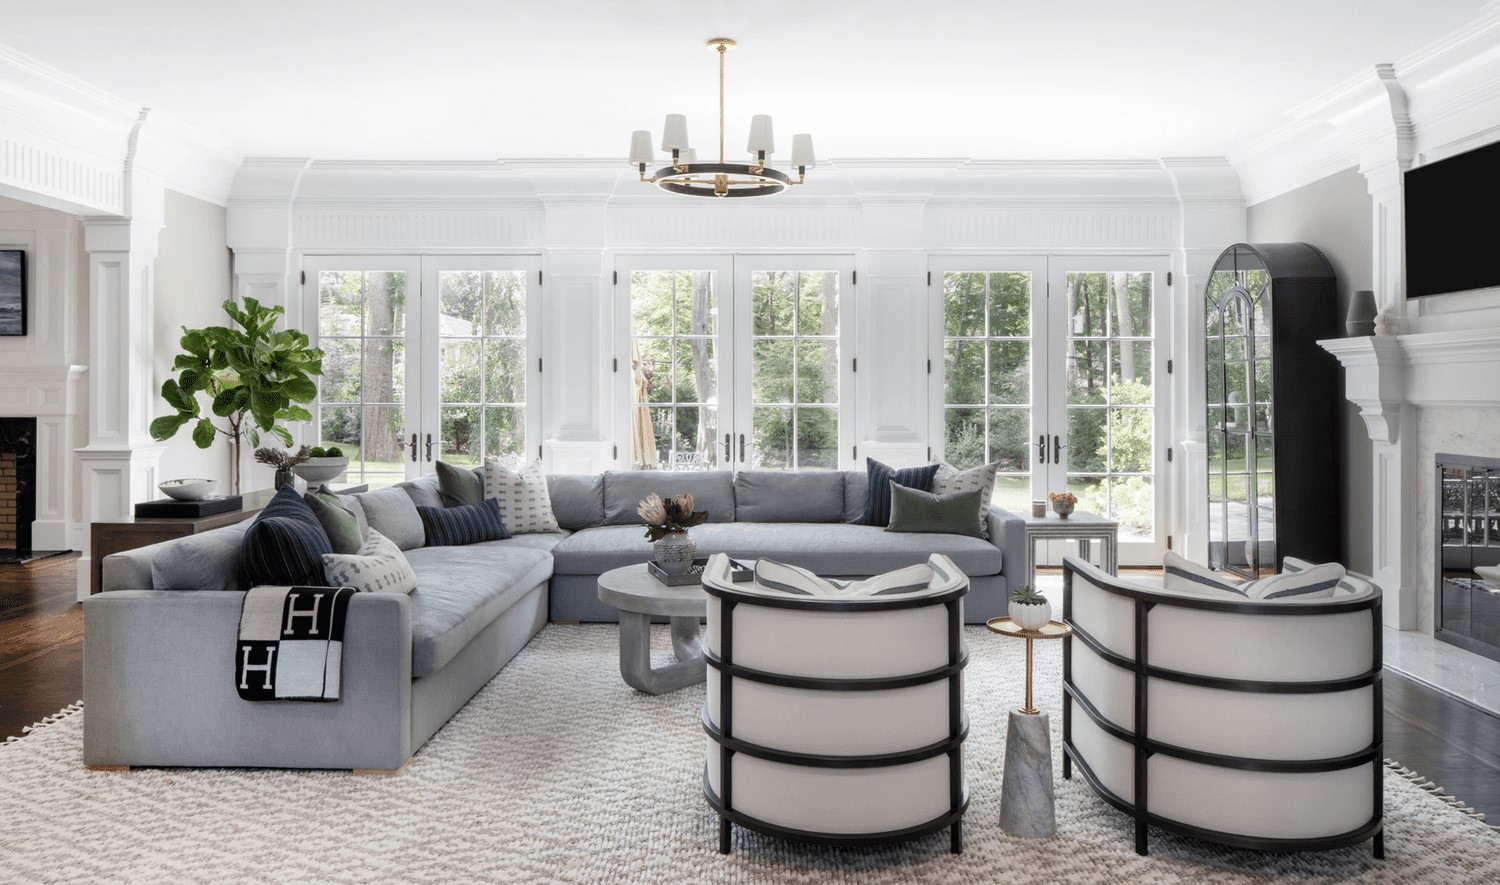 How To Style A Gray Sofa: 5 Secrets From Top Designers